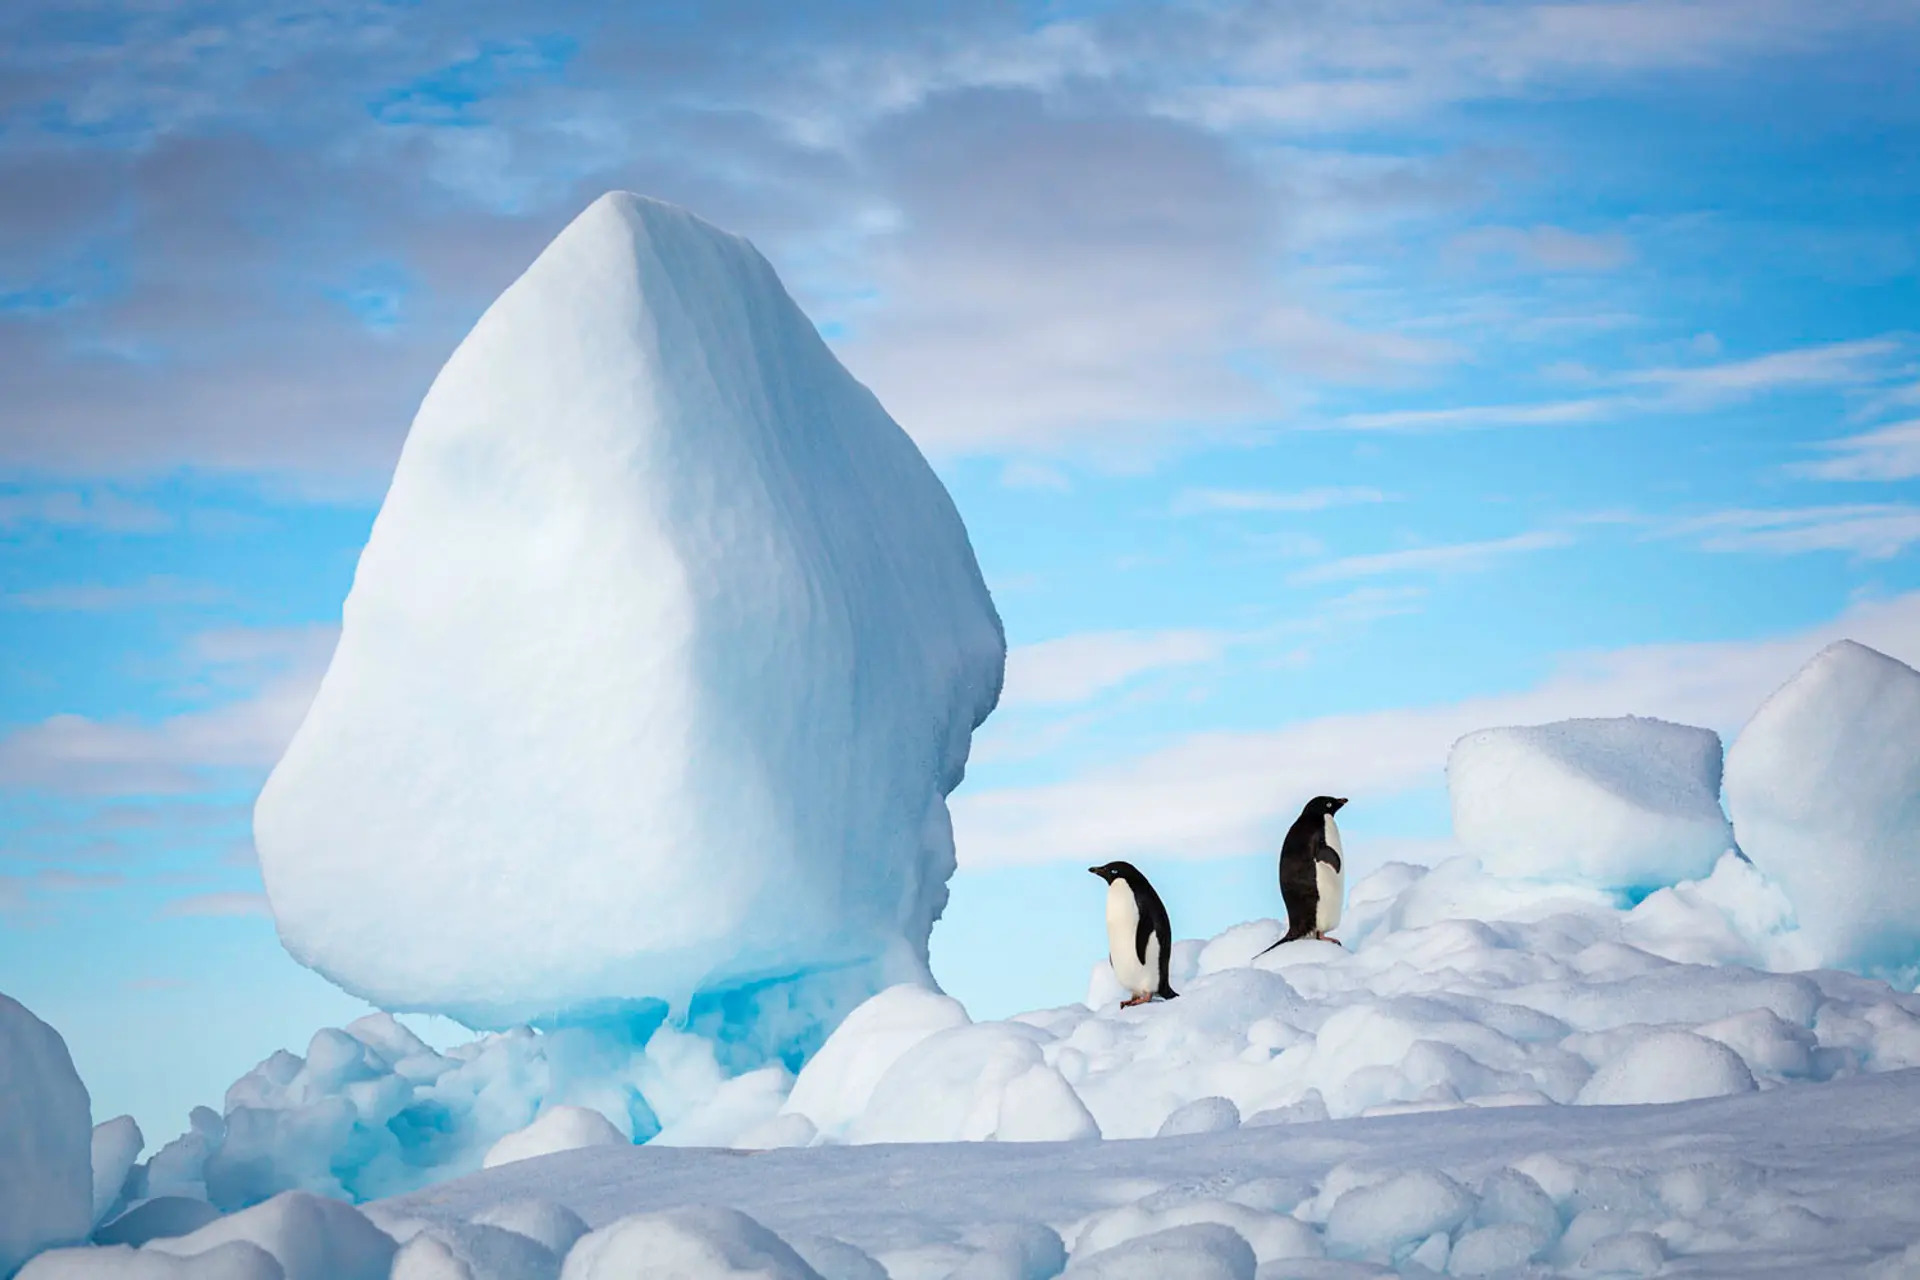 ‘It’s scenes like this that make a trip to the great white continent so memorable. These two Adelie penguins must be in a lovers’ quarrel, as they don’t look like they are on squawking terms.’ Jonathan Irish is a conservation photographer based in Colorado, who specialises in documenting travel and wildlife.